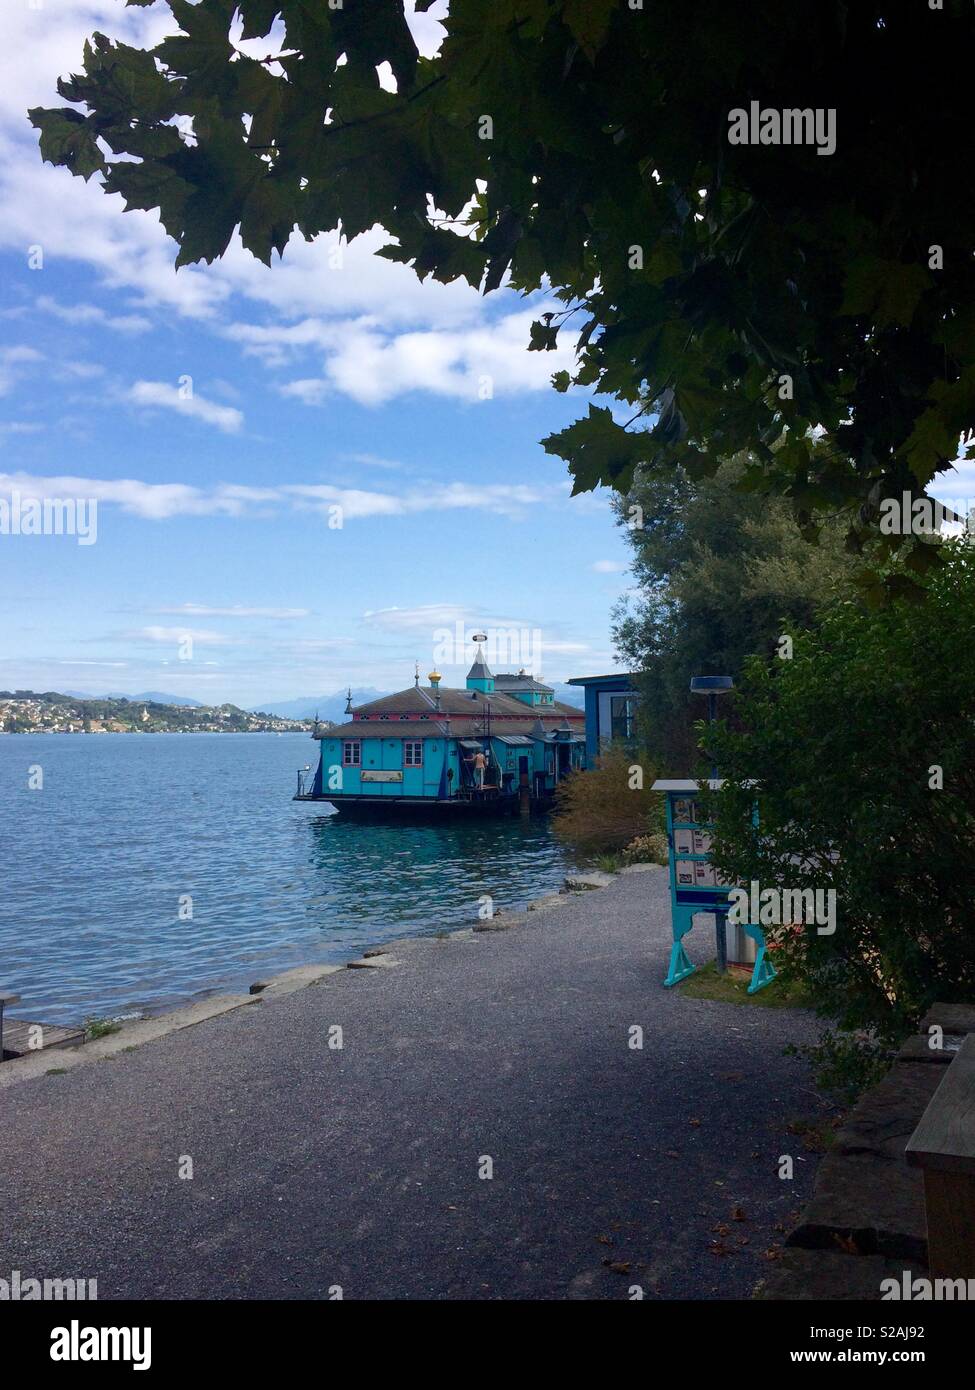 View of Thalwil Badi or bathing house at Zurichsee or Lake Zurich in Switzerland Stock Photo